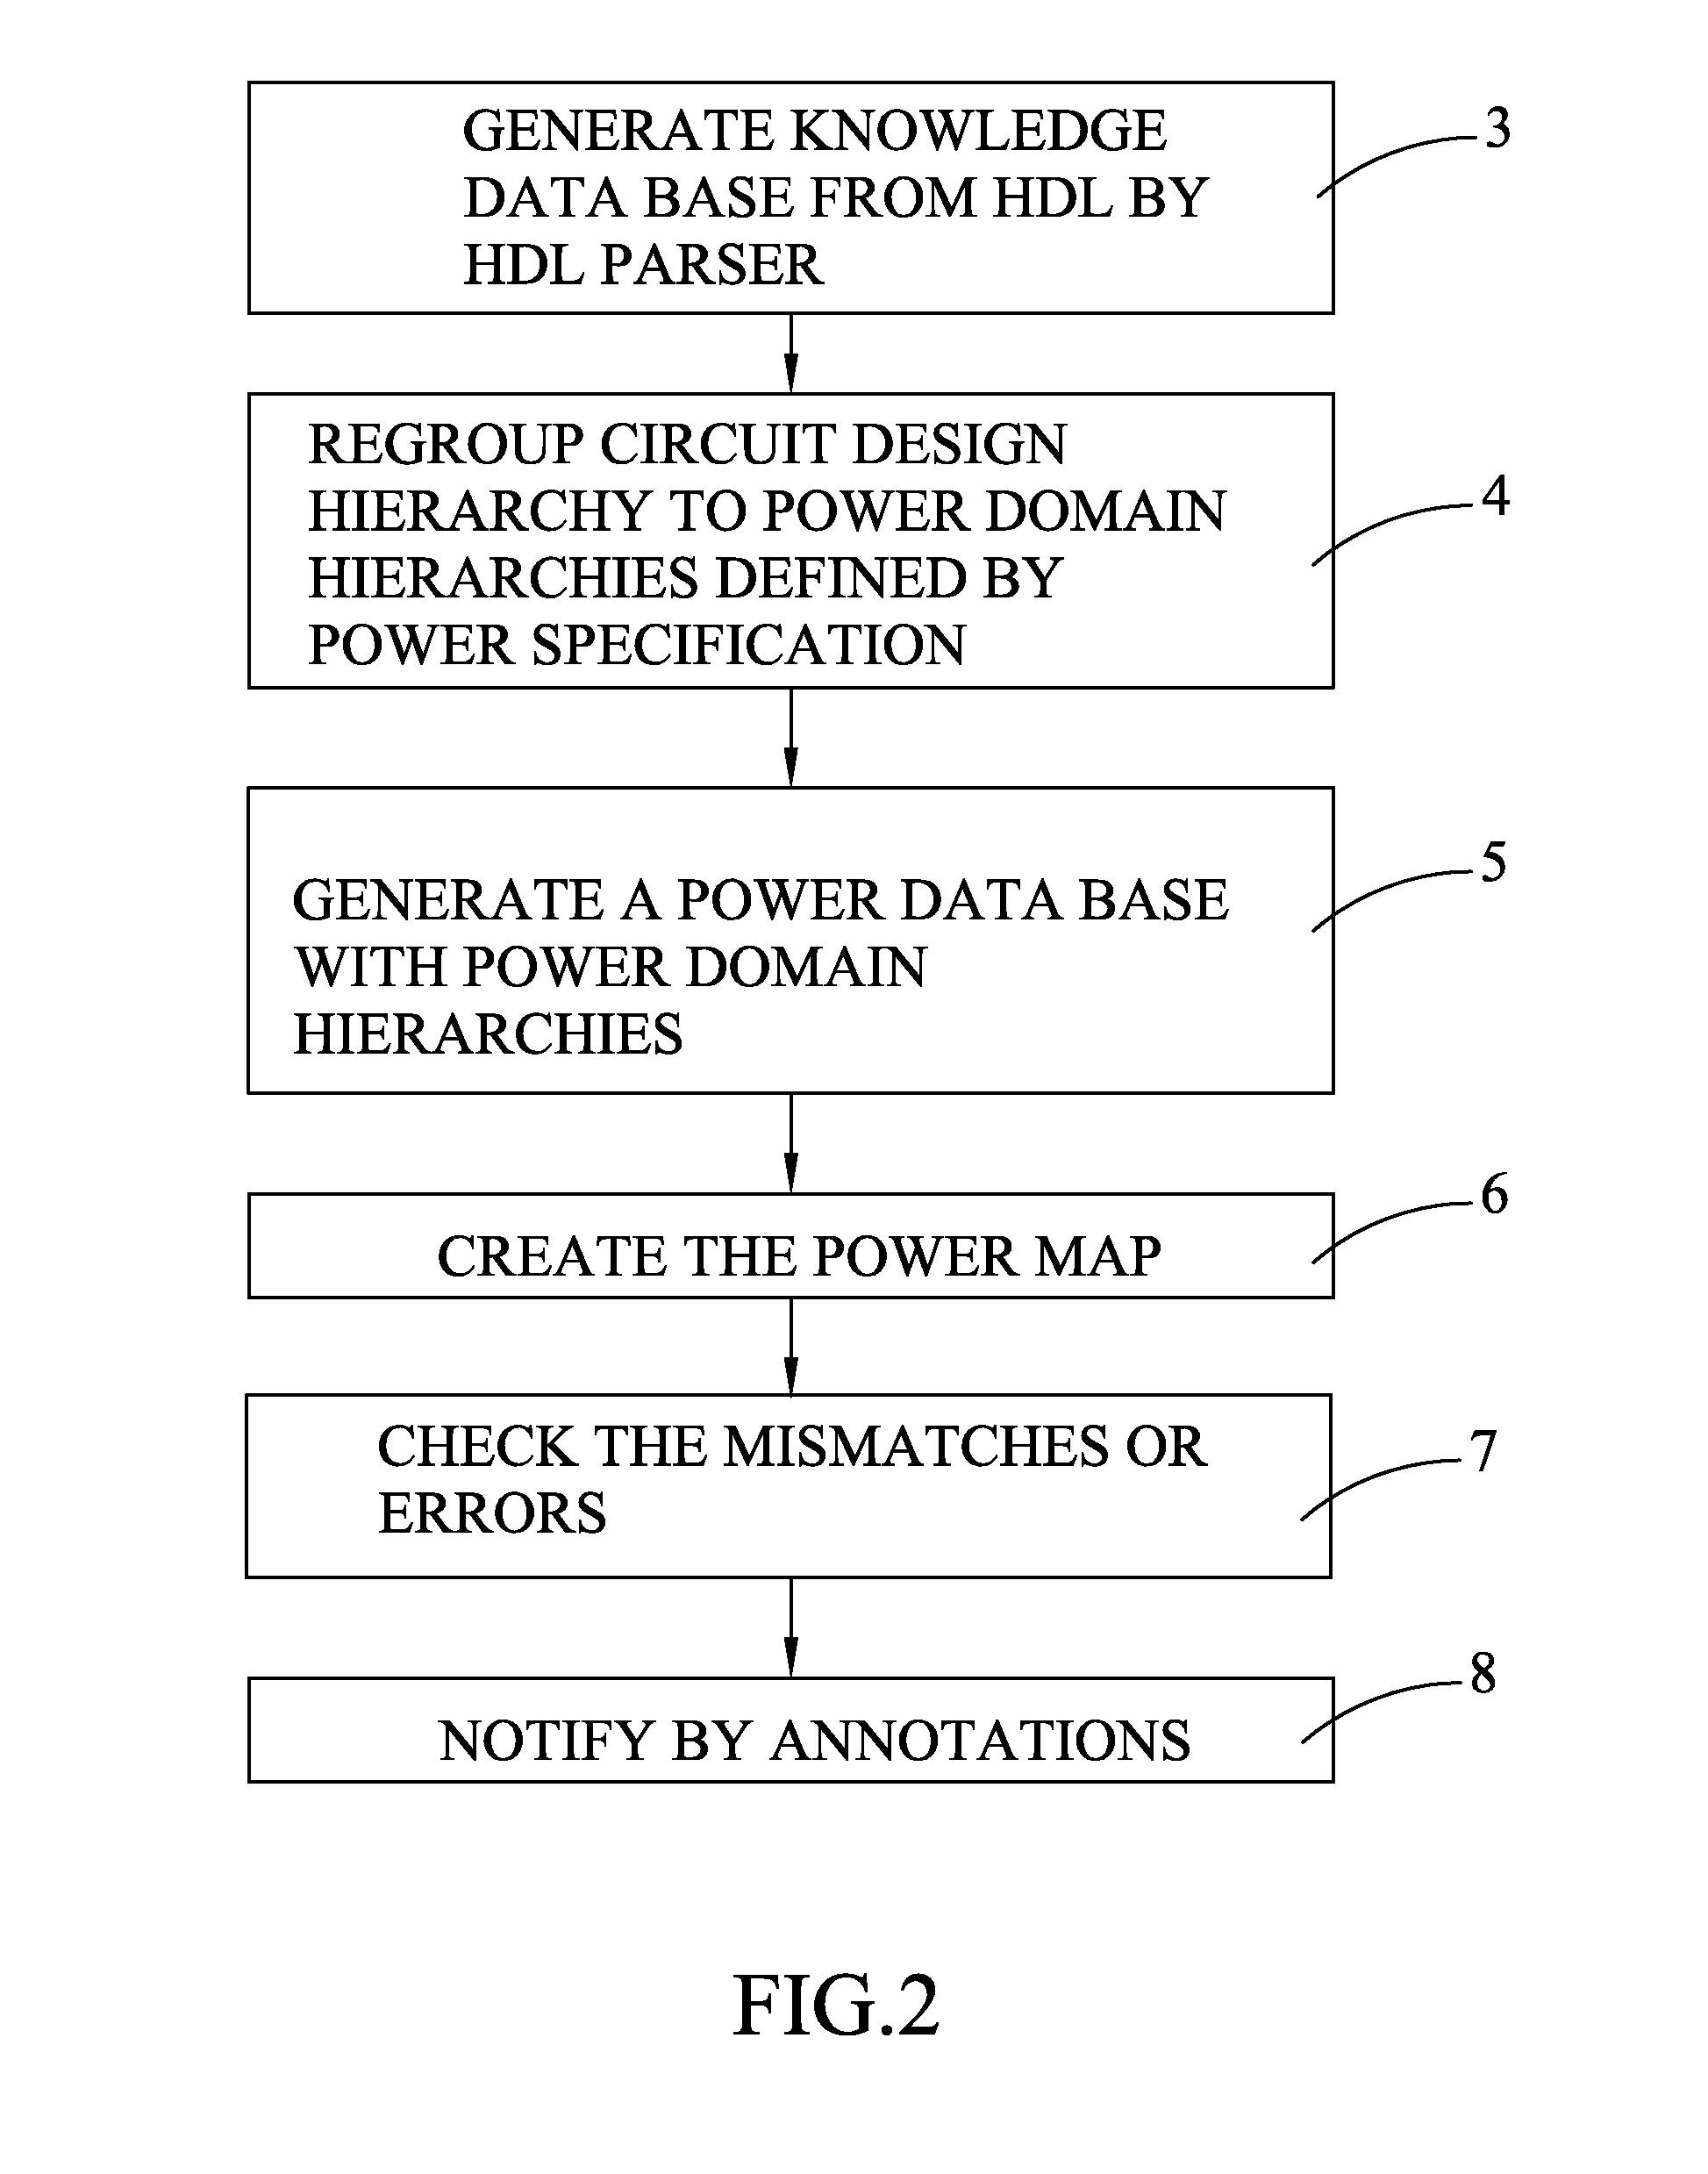 Hierarchial power map for low power design